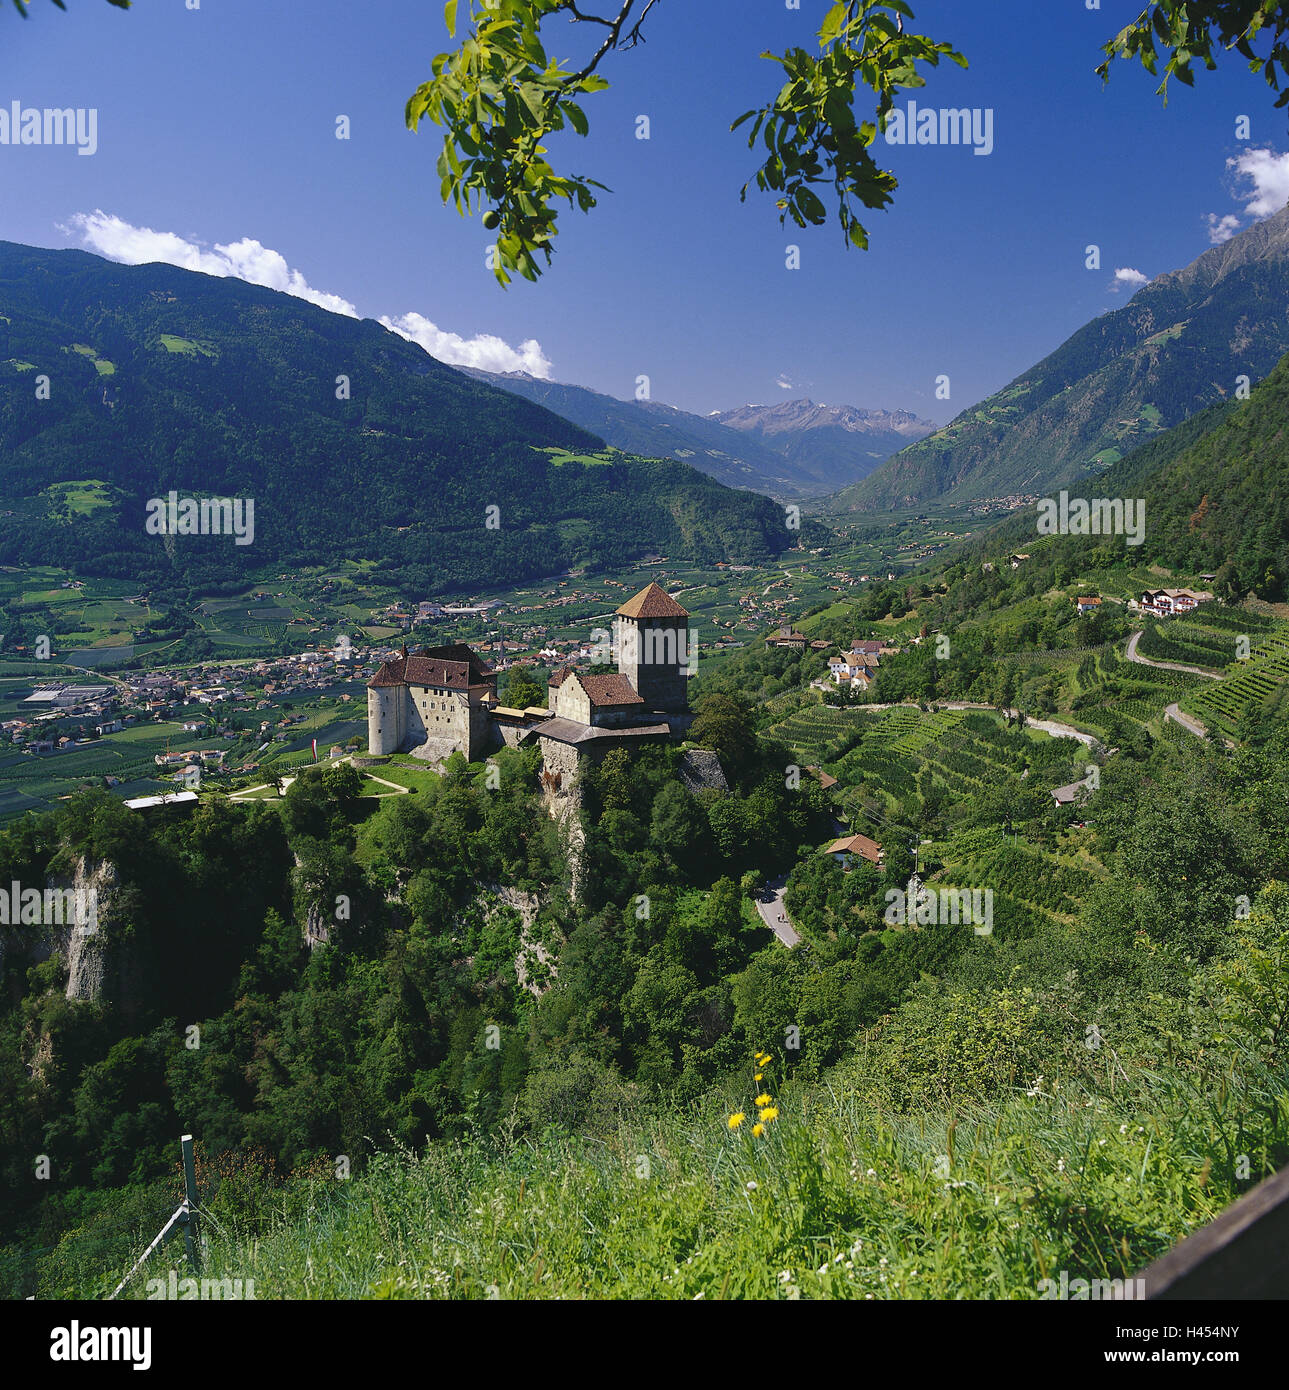 Italy, South Tyrol, castle Tyrol, view, Vinschgau, scenery, mountains, mountains, valley, places, vineyards, viticulture, wine-growing area, building, castle, structure, architecture, Stock Photo